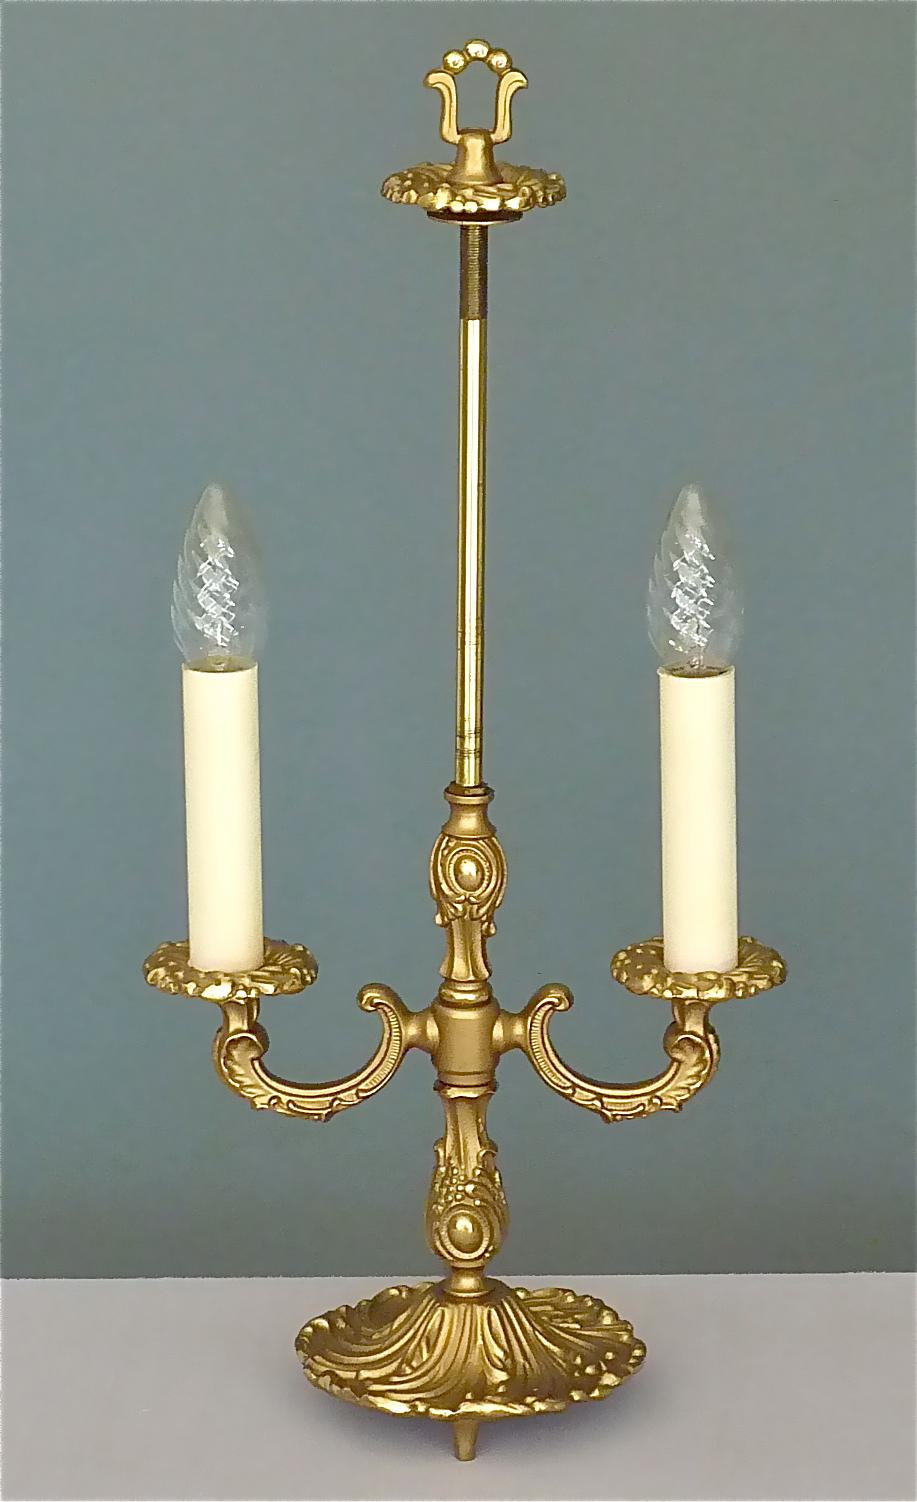 Baroque Maison Jansen Style Midcentury Table Lamp Brass Leaf Decor Germany 1950s For Sale 9